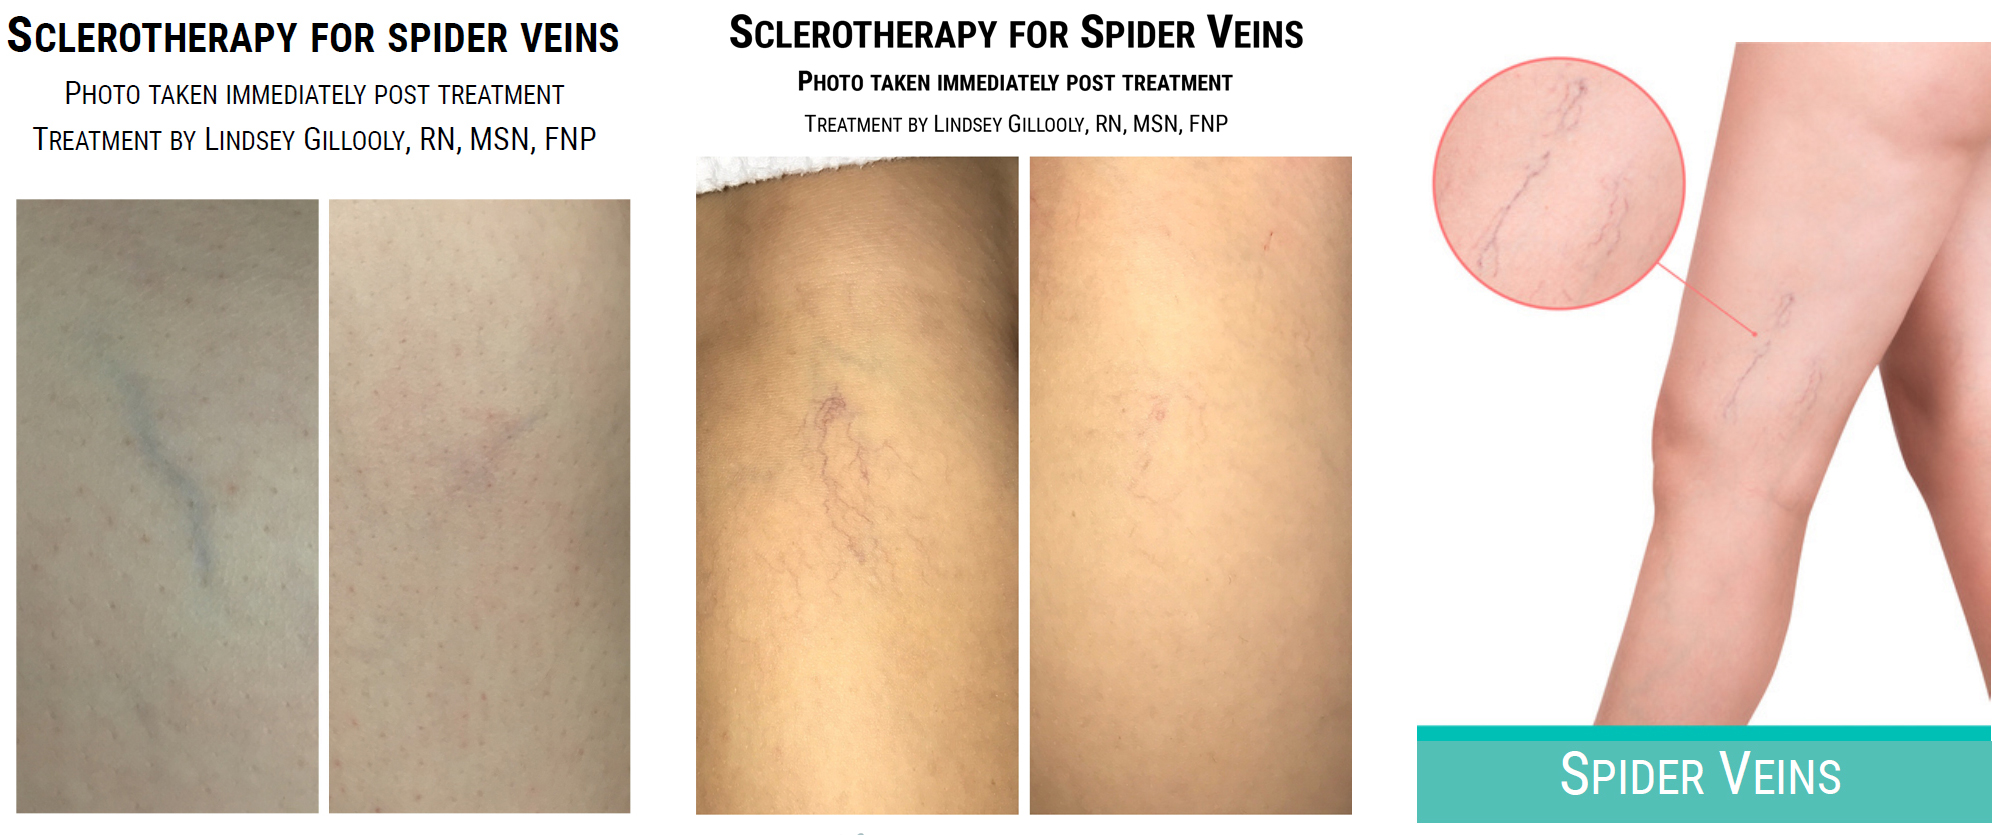 Dream Spa Medical Blog | SCLEROTHERAPY: One-Stop Solution Treatment For Varicose Veins